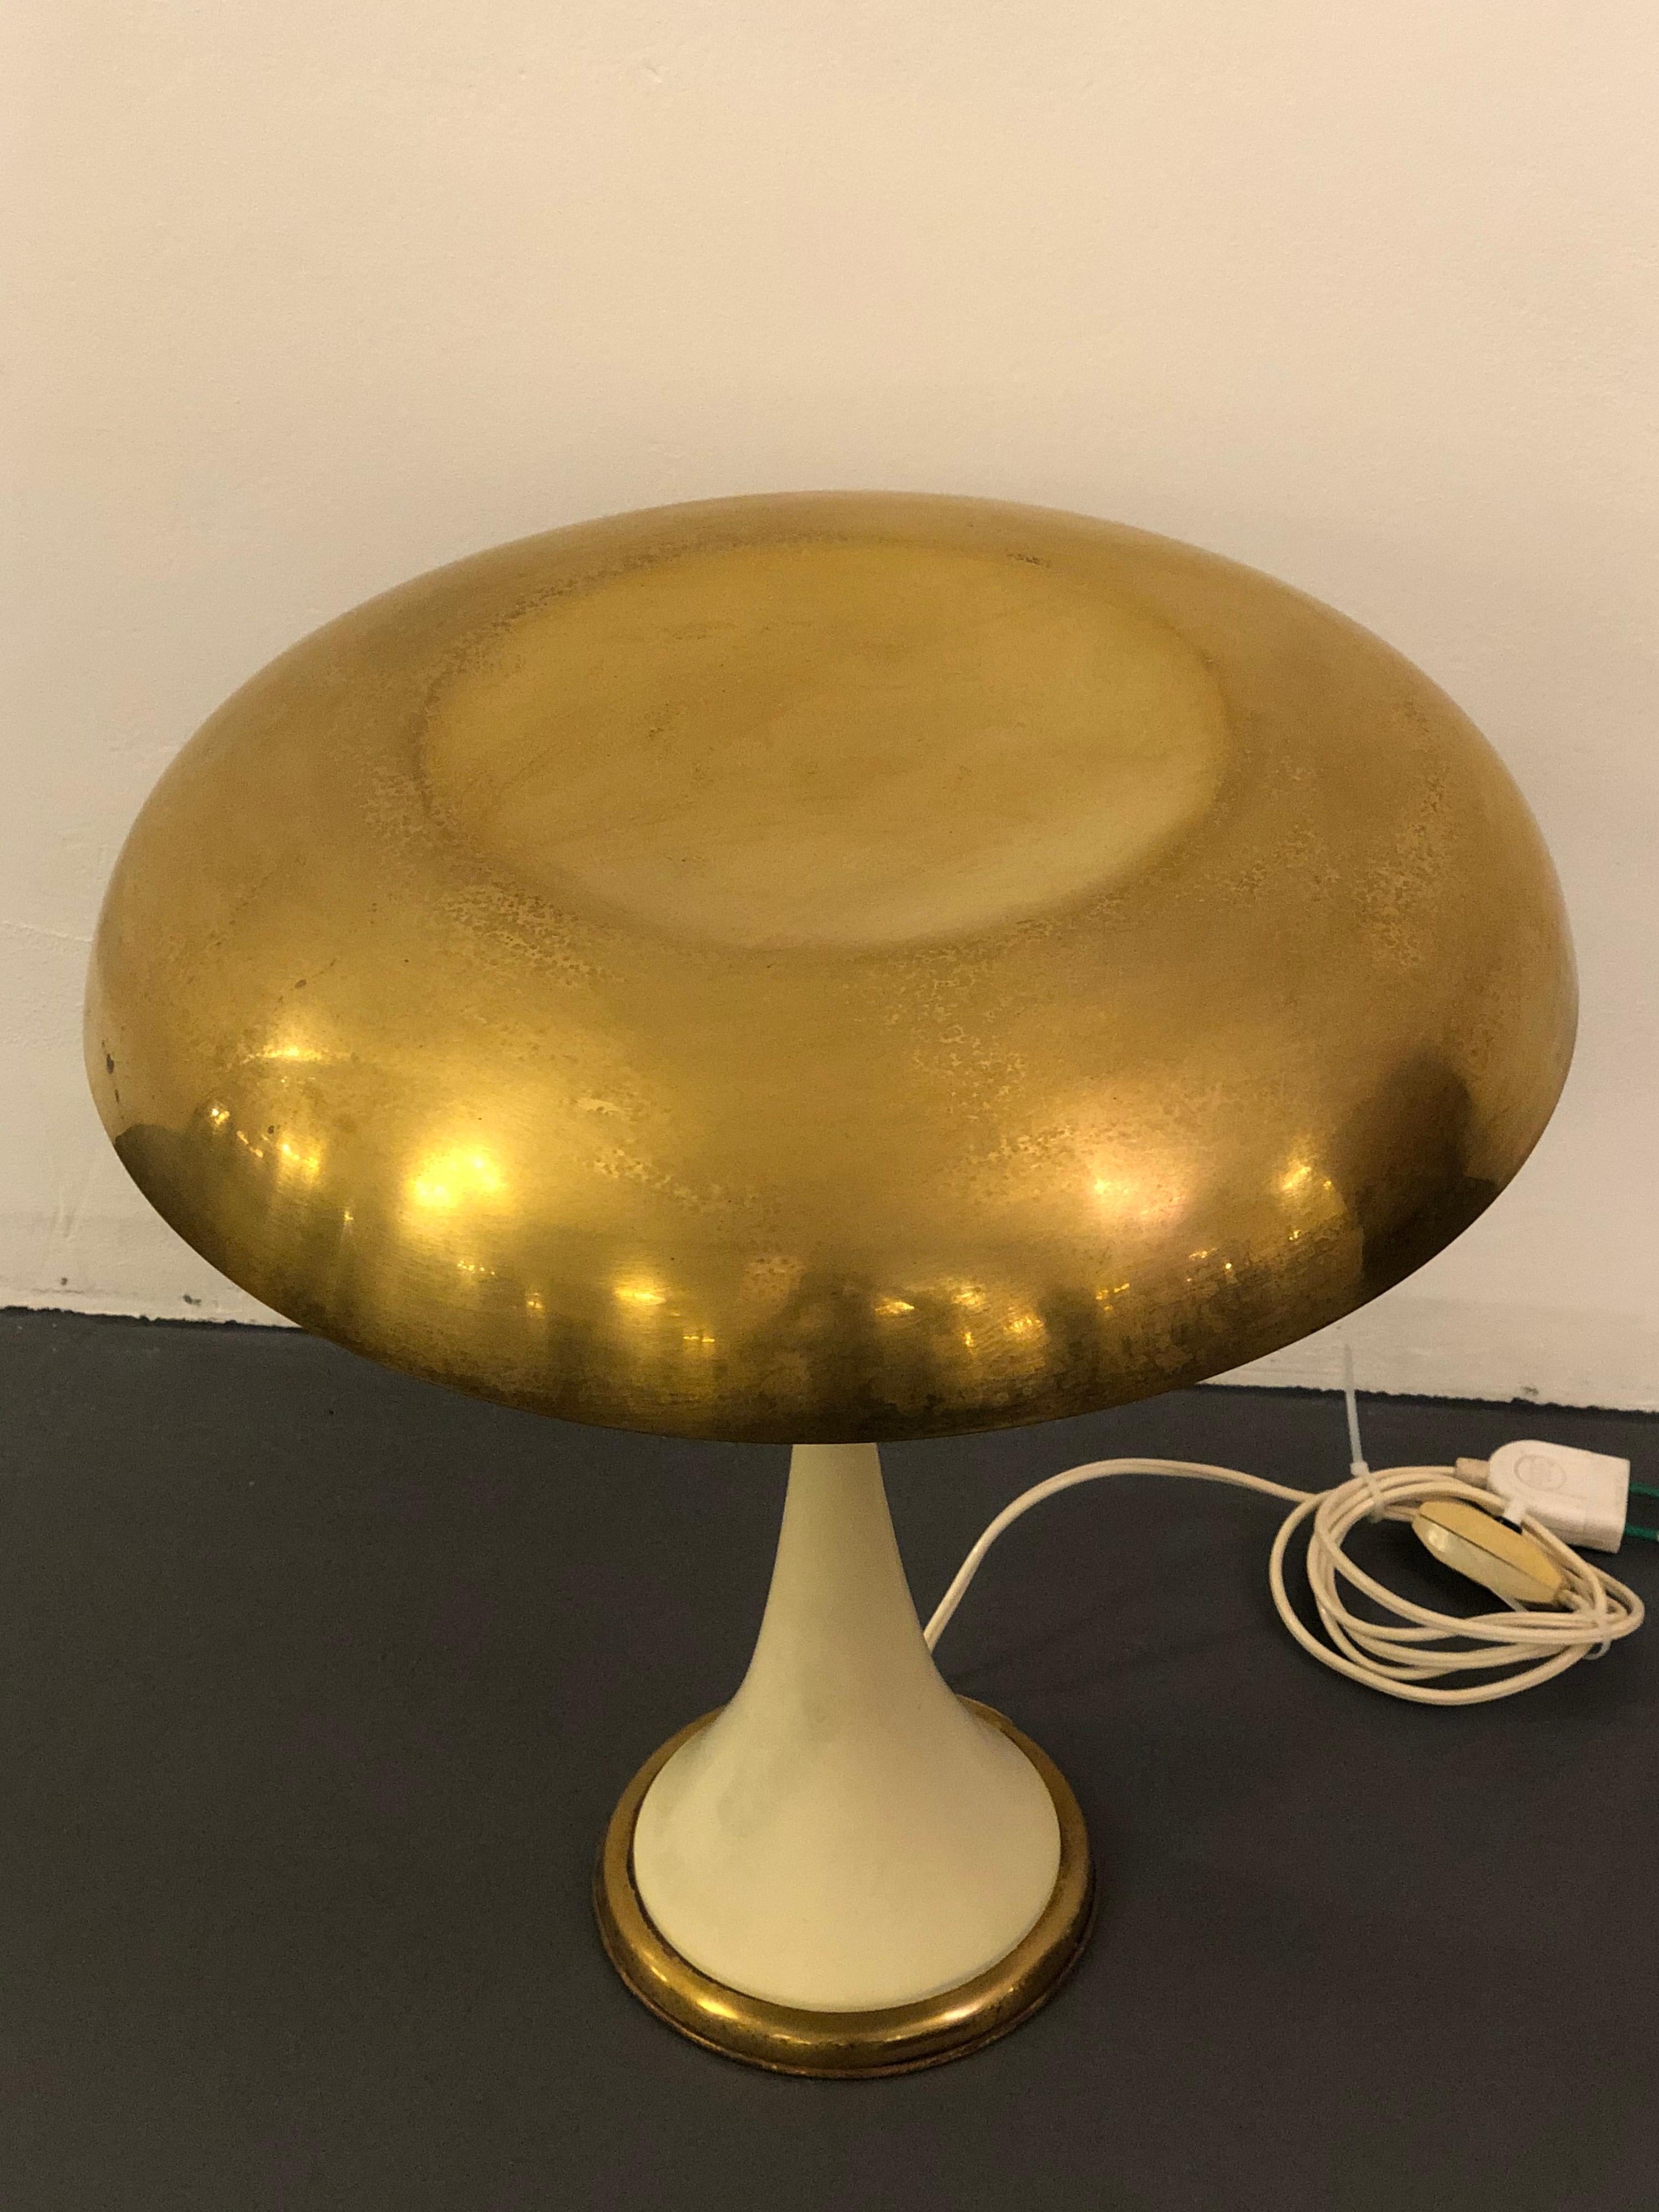 Midcentury Brass and Lacquer Table Lamp by Oscar Torlasco for Lumi, 1950s For Sale 3